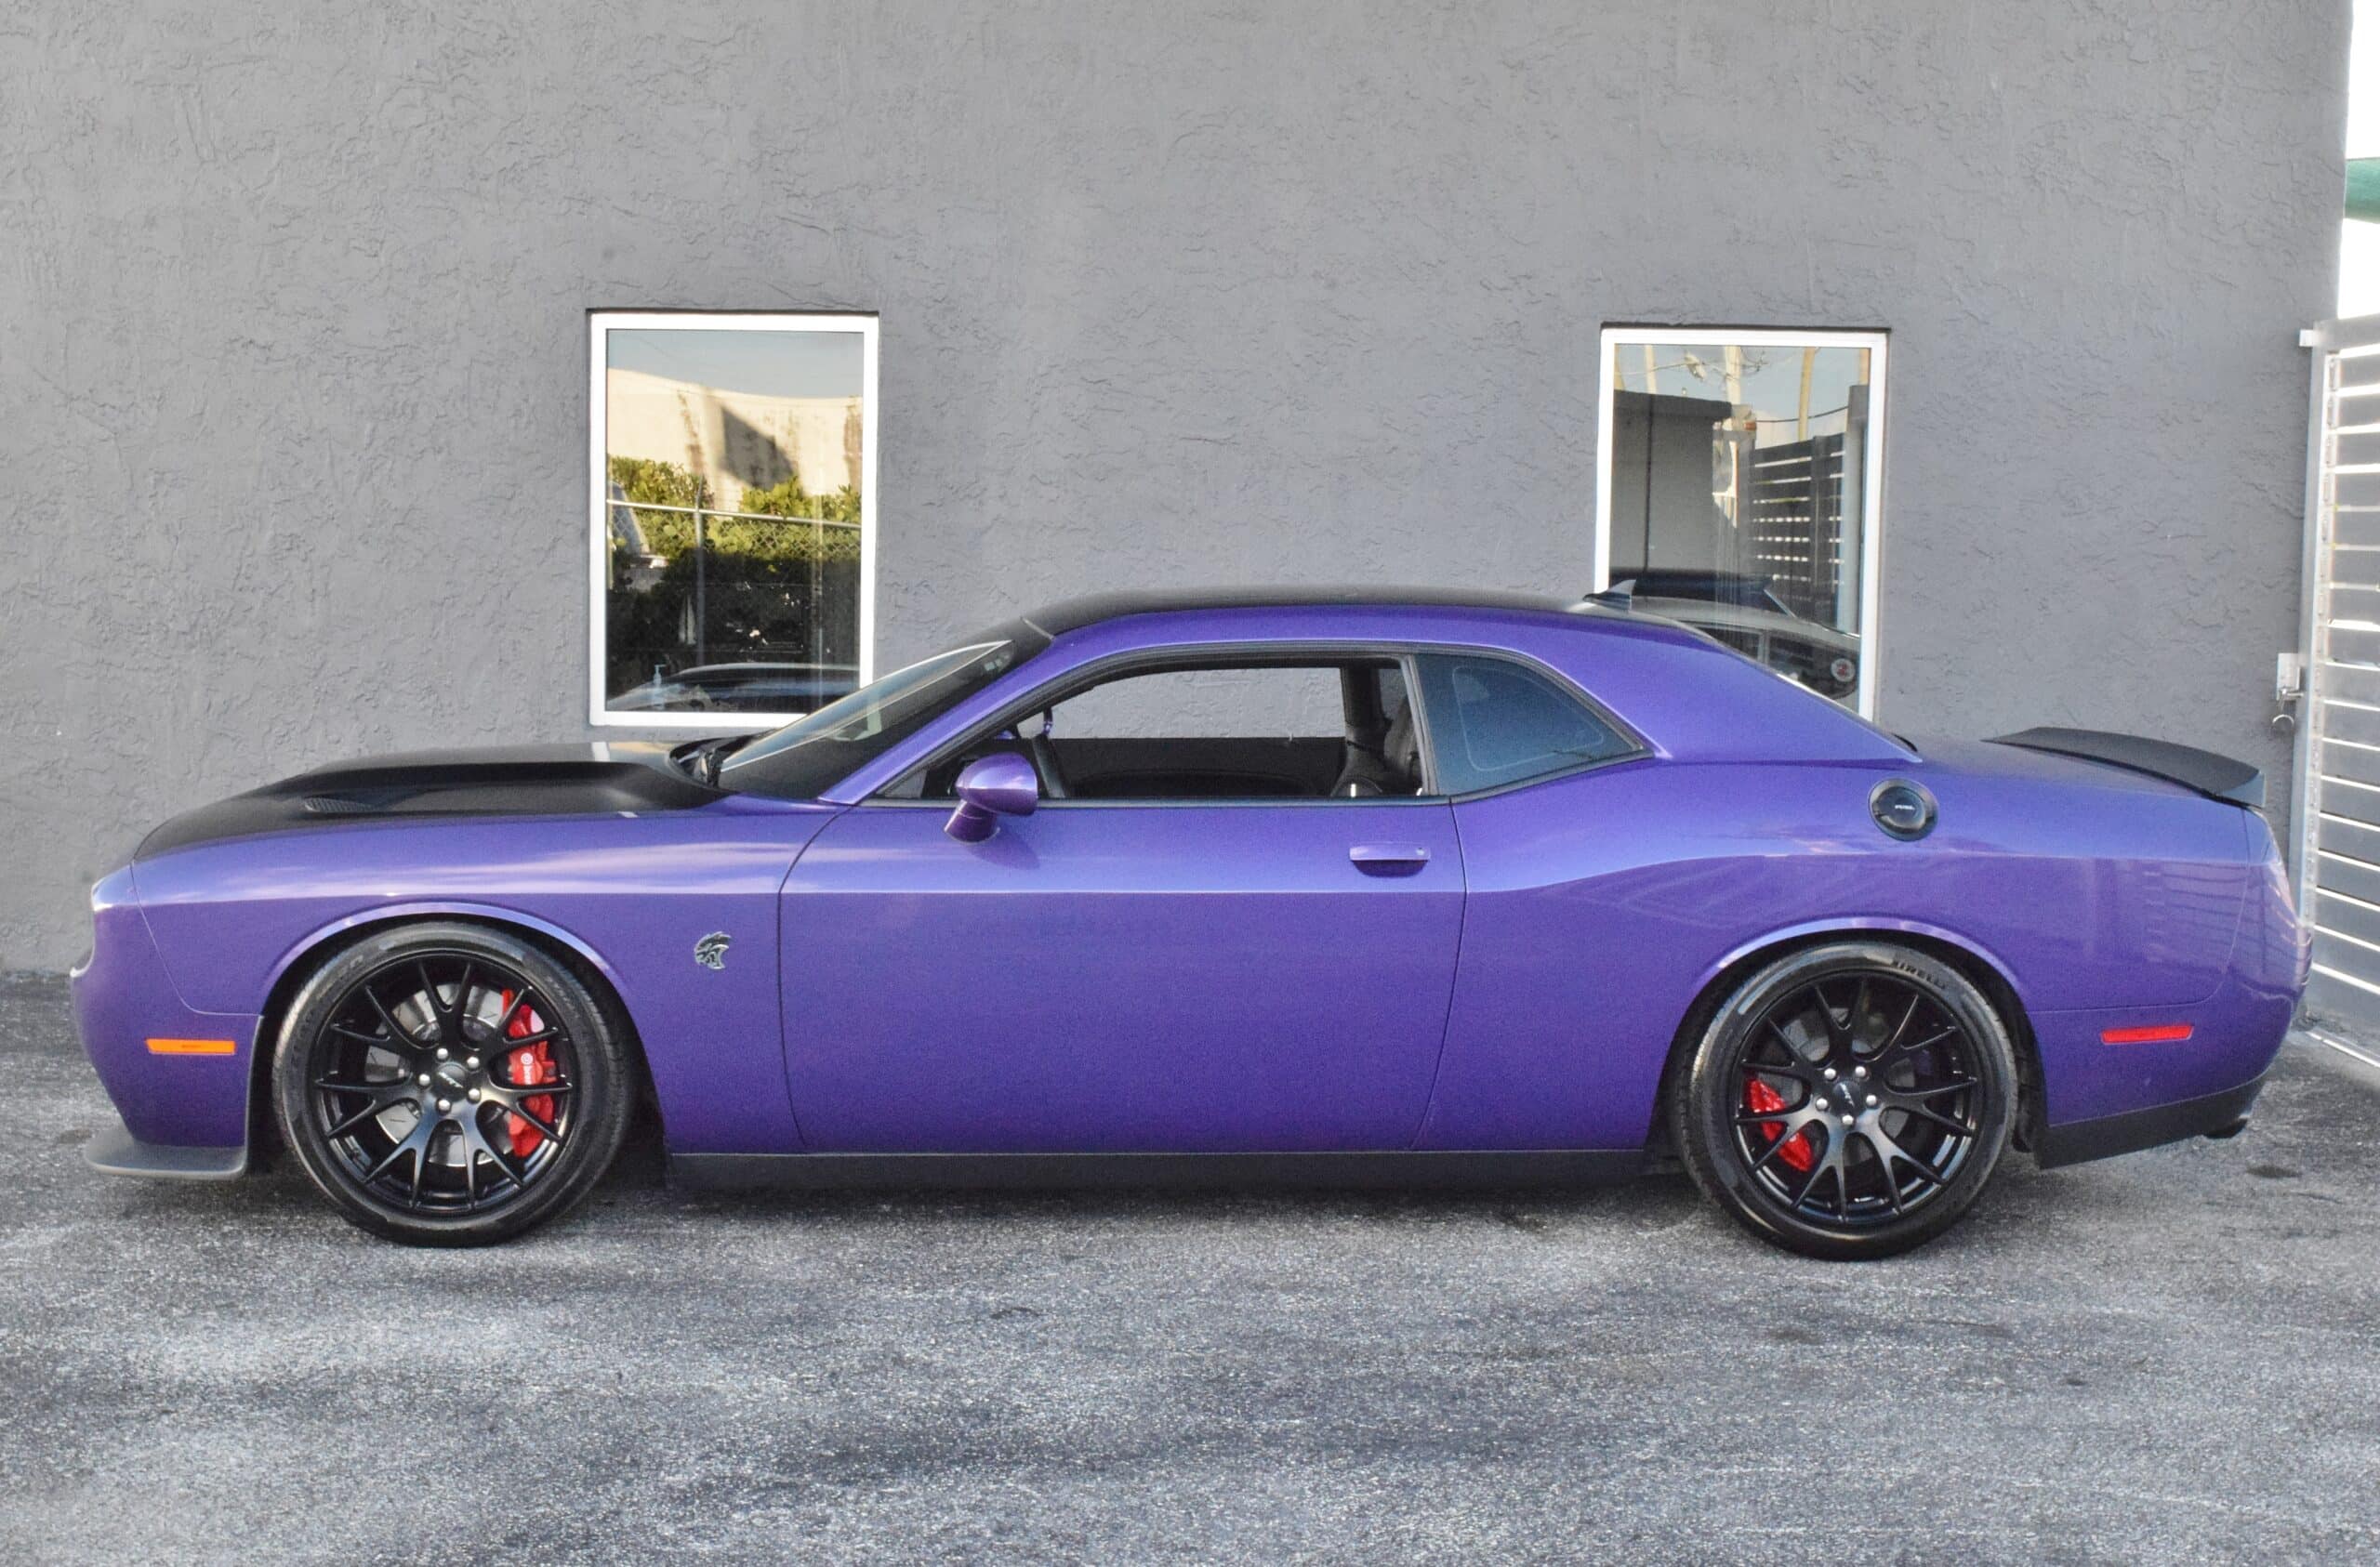 2016 Dodge Challenger SRT HELLCAT Supercharged HEMI ONLY 14K MILES! Plum Crazy Pearl- Corsa Exhaust – FULLY LOADED -HEMI 26R Package